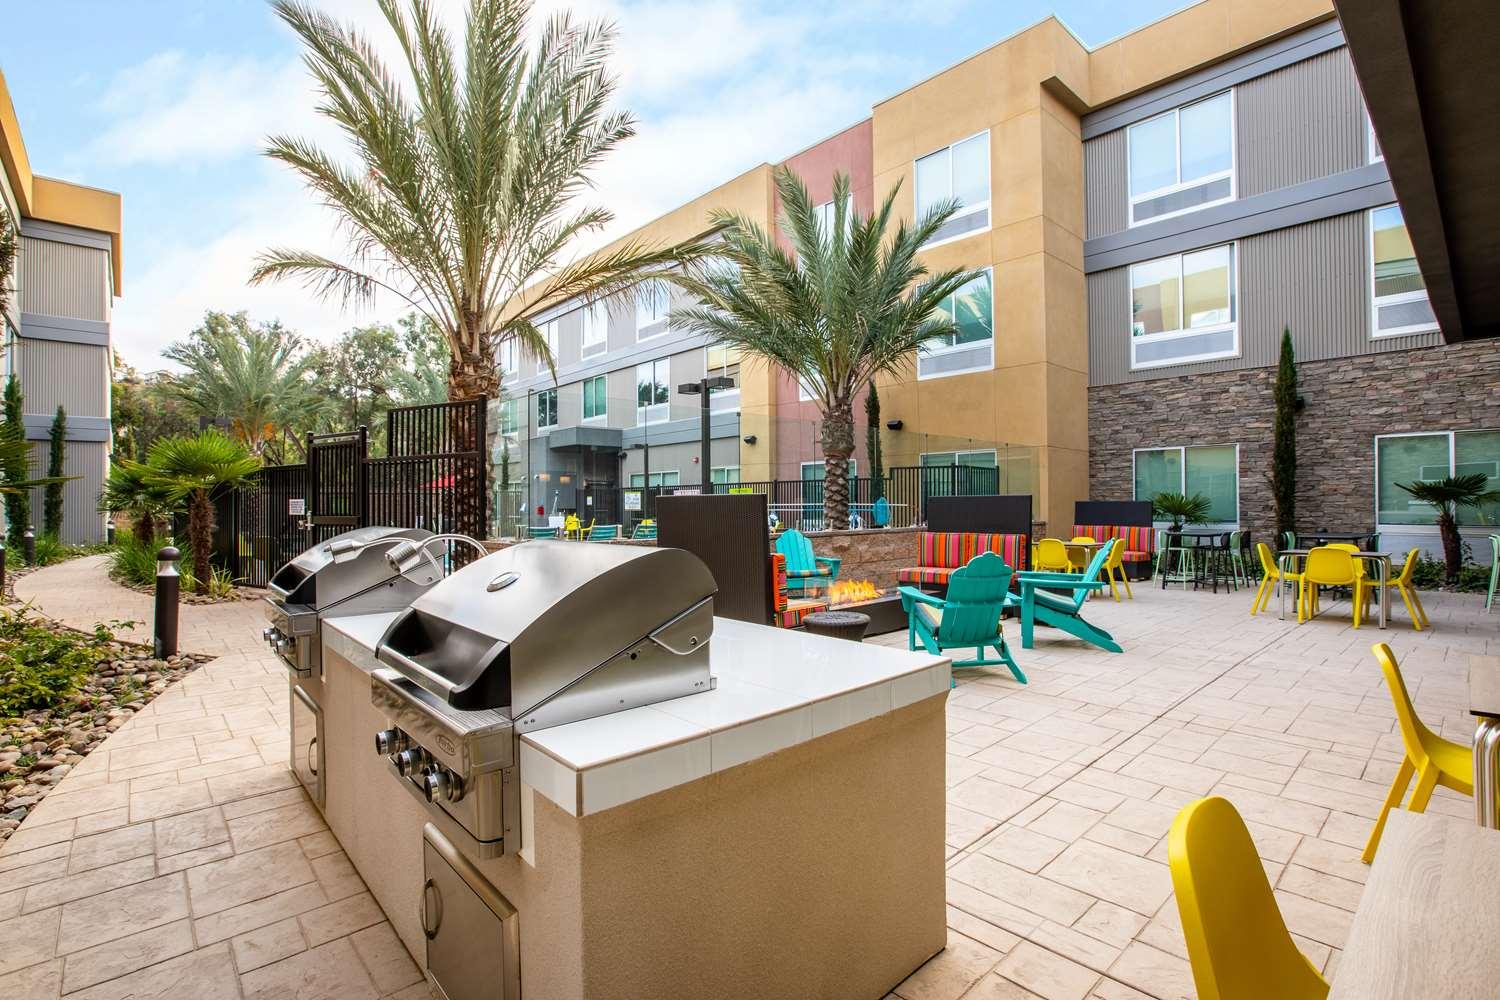 Home2 Suites by Hilton Carlsbad in Carlsbad, CA